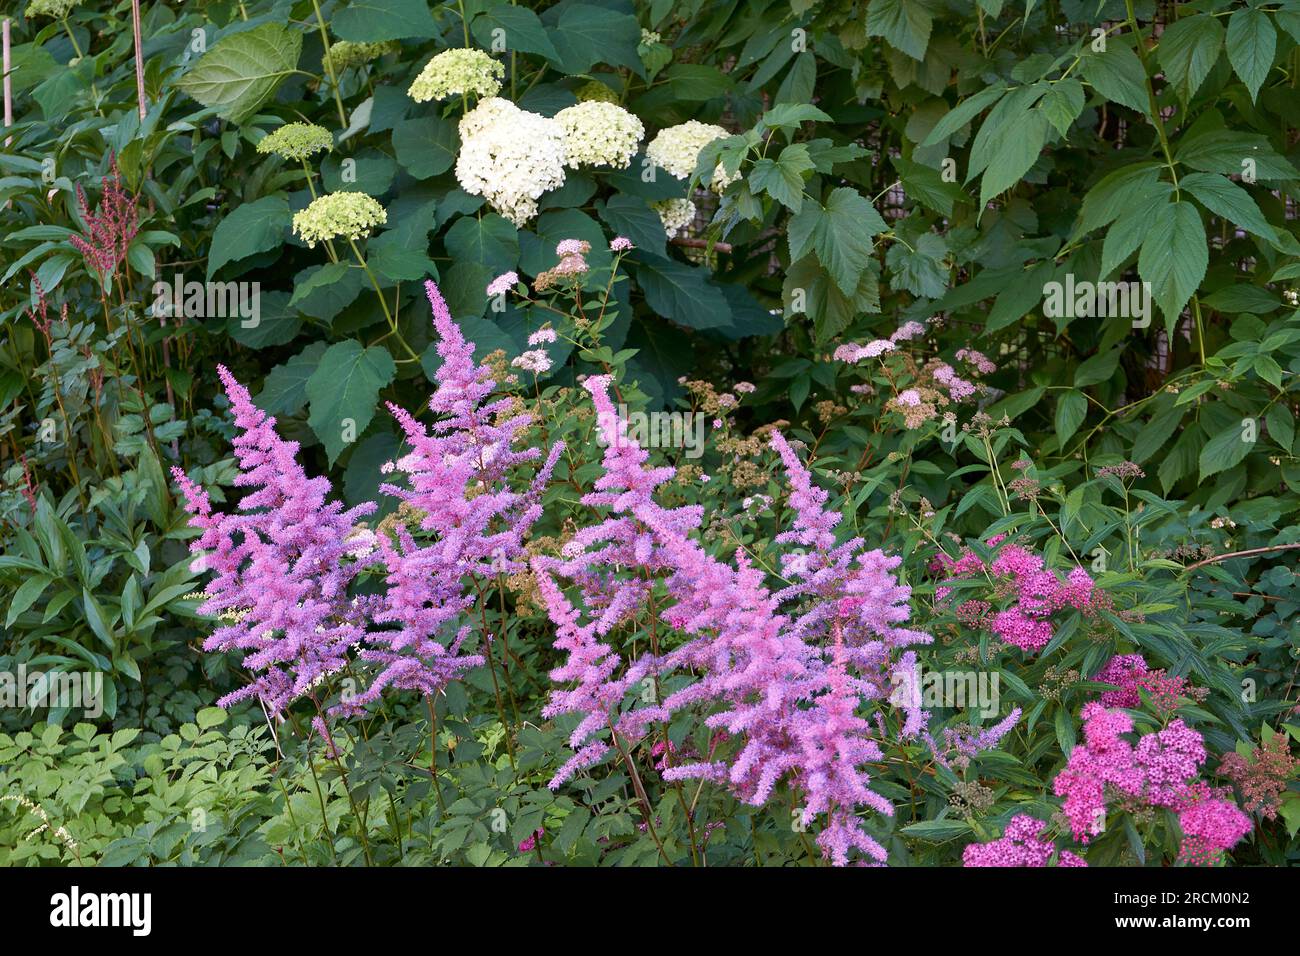 Lilac-purple colored Astilbe Amethyst flowers (Astilbe x arendsii)  blooming in summer Stock Photo